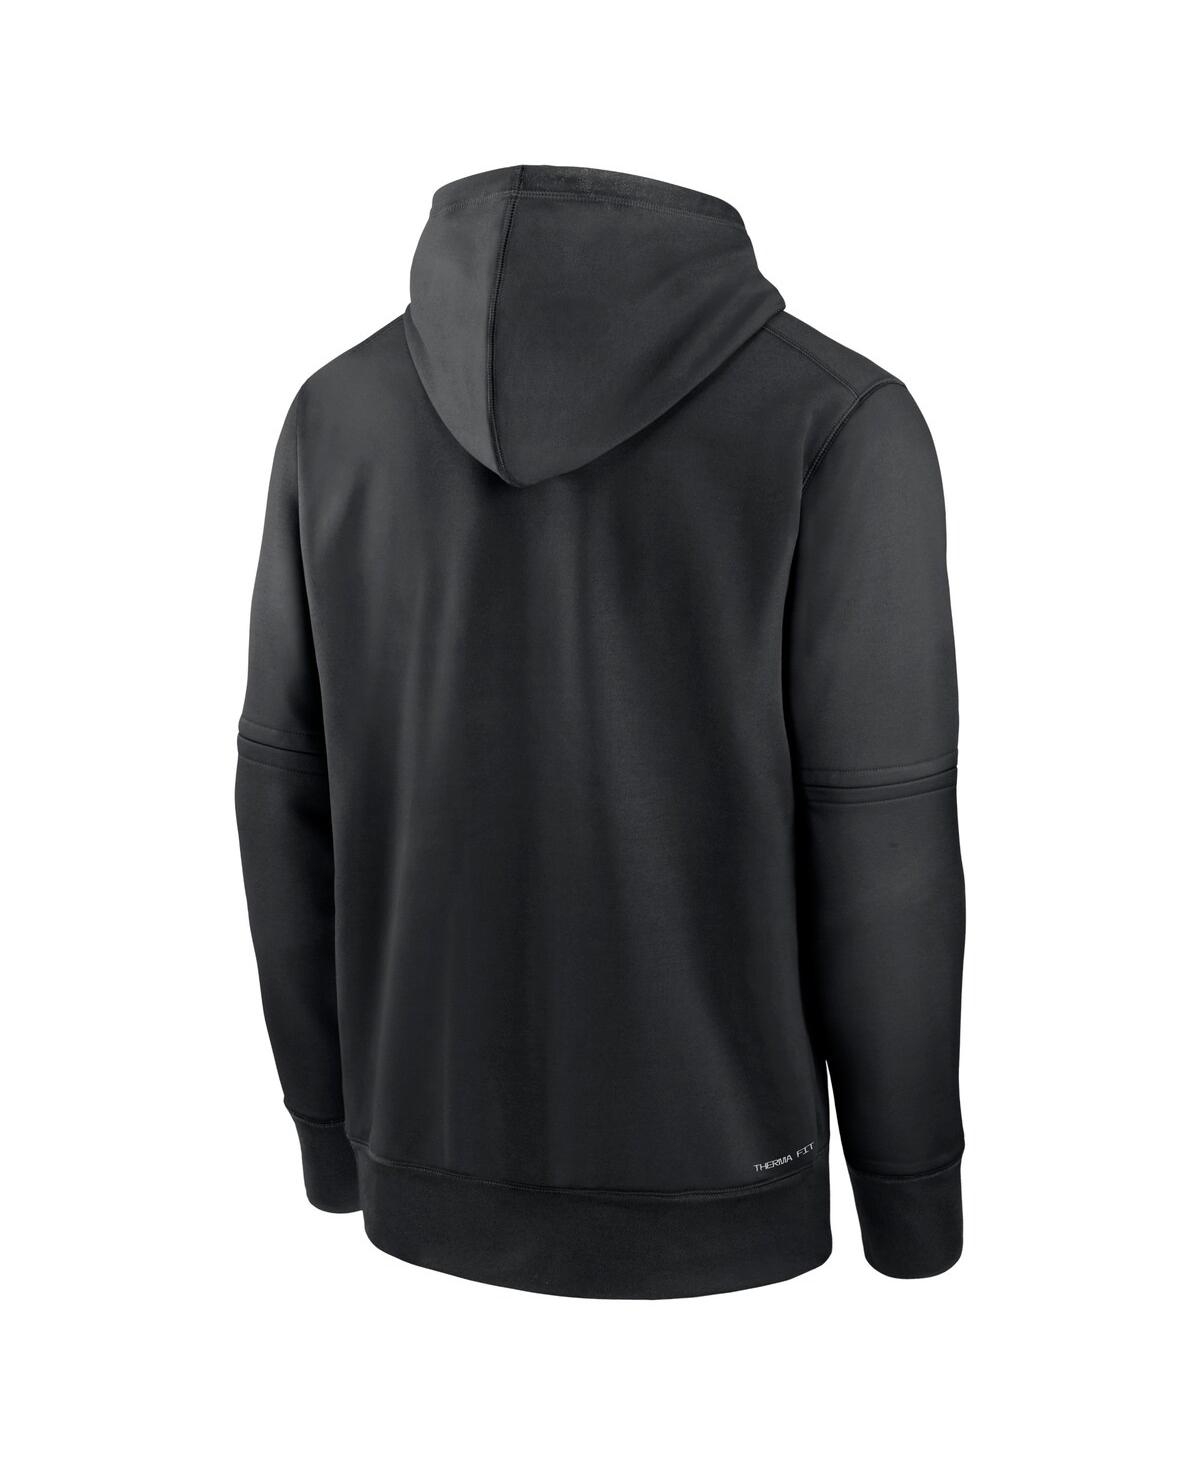 Shop Nike Men's  Black Colorado Rockies Authentic Collection Practice Performance Pullover Hoodie